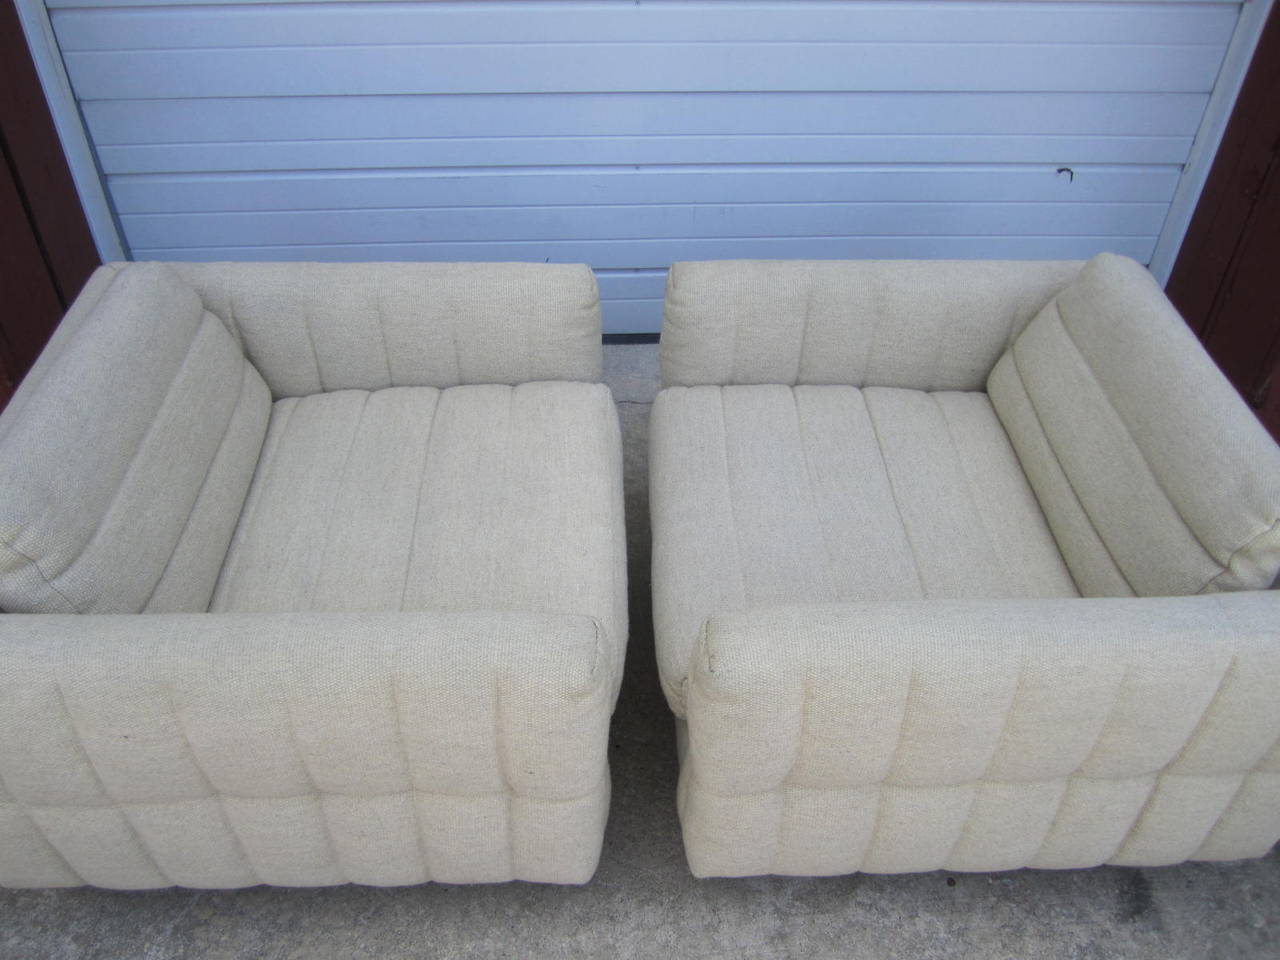 Late 20th Century Lovely Pair of Channel Tufted Milo Baughman Cube Chairs Chrome Base Mid-Century For Sale